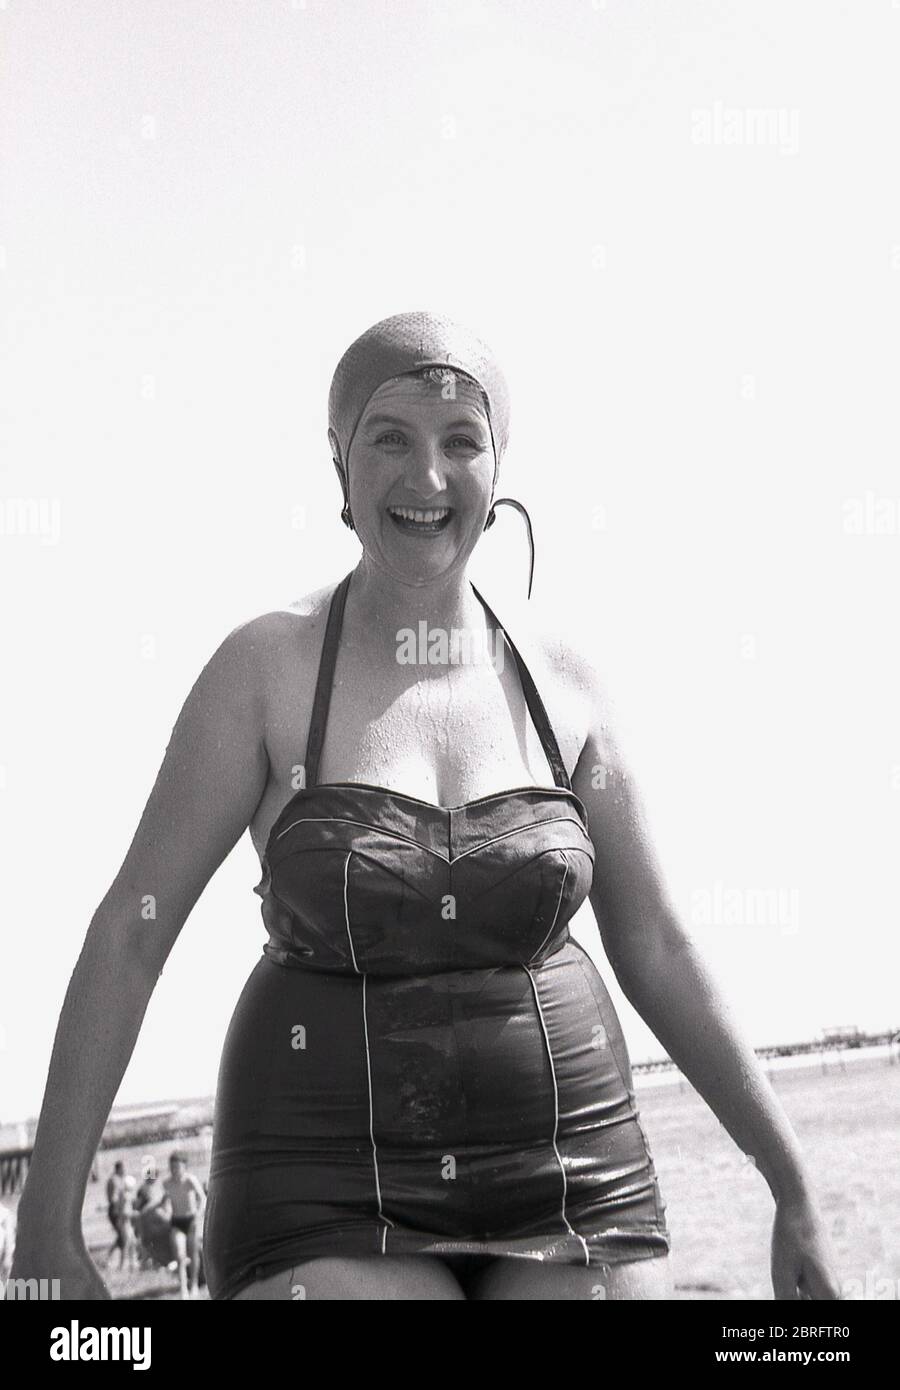 1961, historical, a mature, rather portly lady in a wet bathing costume and rubber bathing hat smiling, having just had a swim in the sea, England, UK. Stock Photo